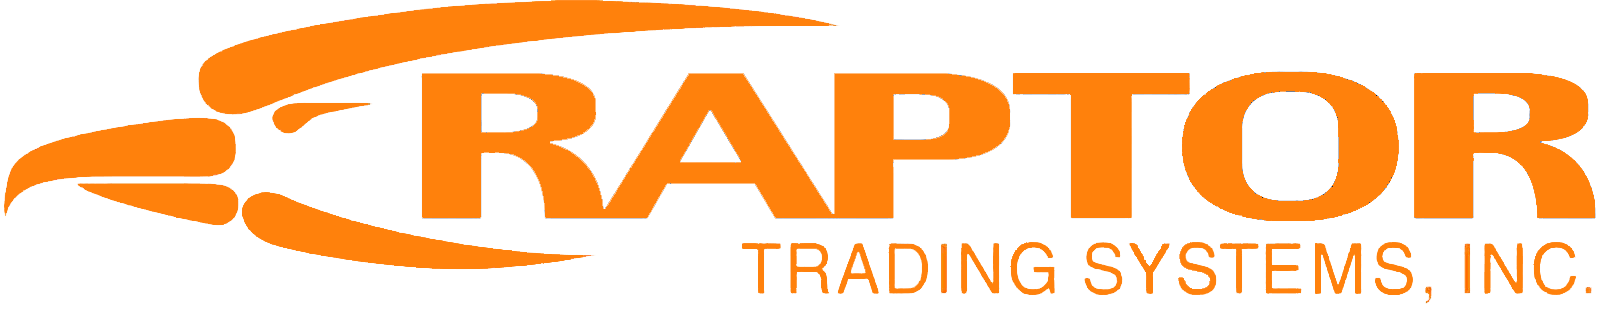 Raptor Trading Systems, Inc.